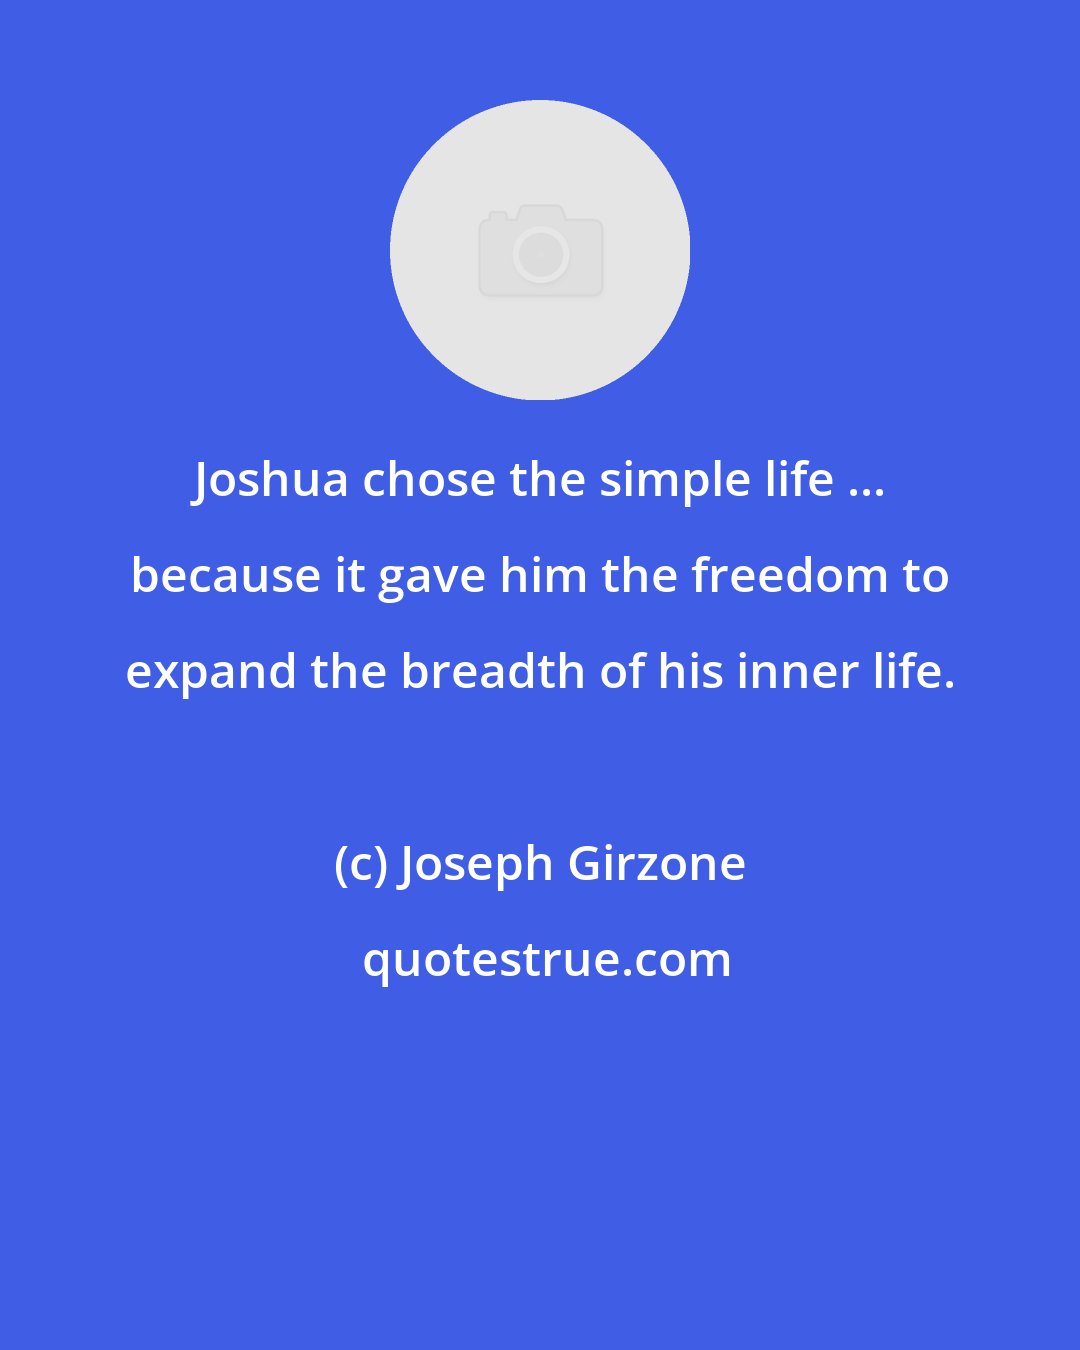 Joseph Girzone: Joshua chose the simple life ... because it gave him the freedom to expand the breadth of his inner life.